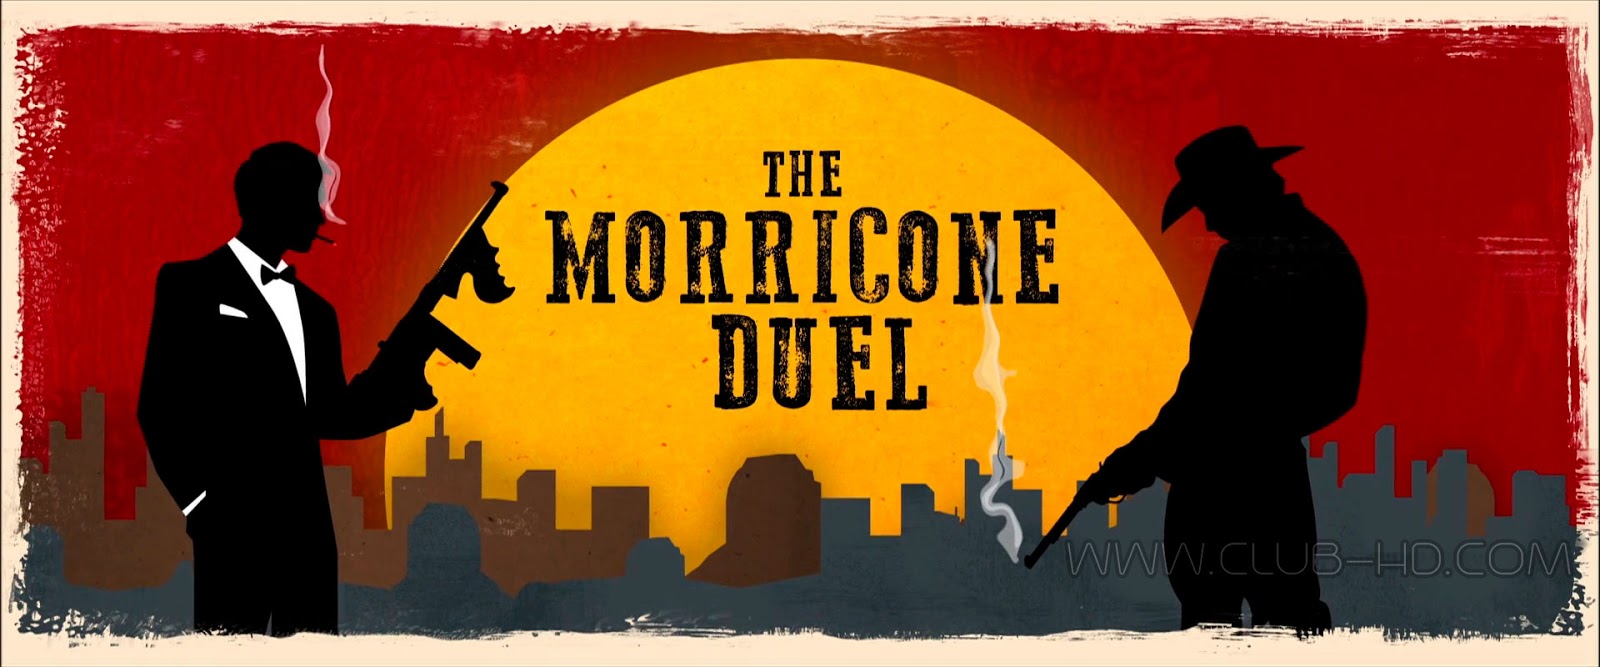 The Morricone Duel: The Most Dangerous Concert Ever (2017)